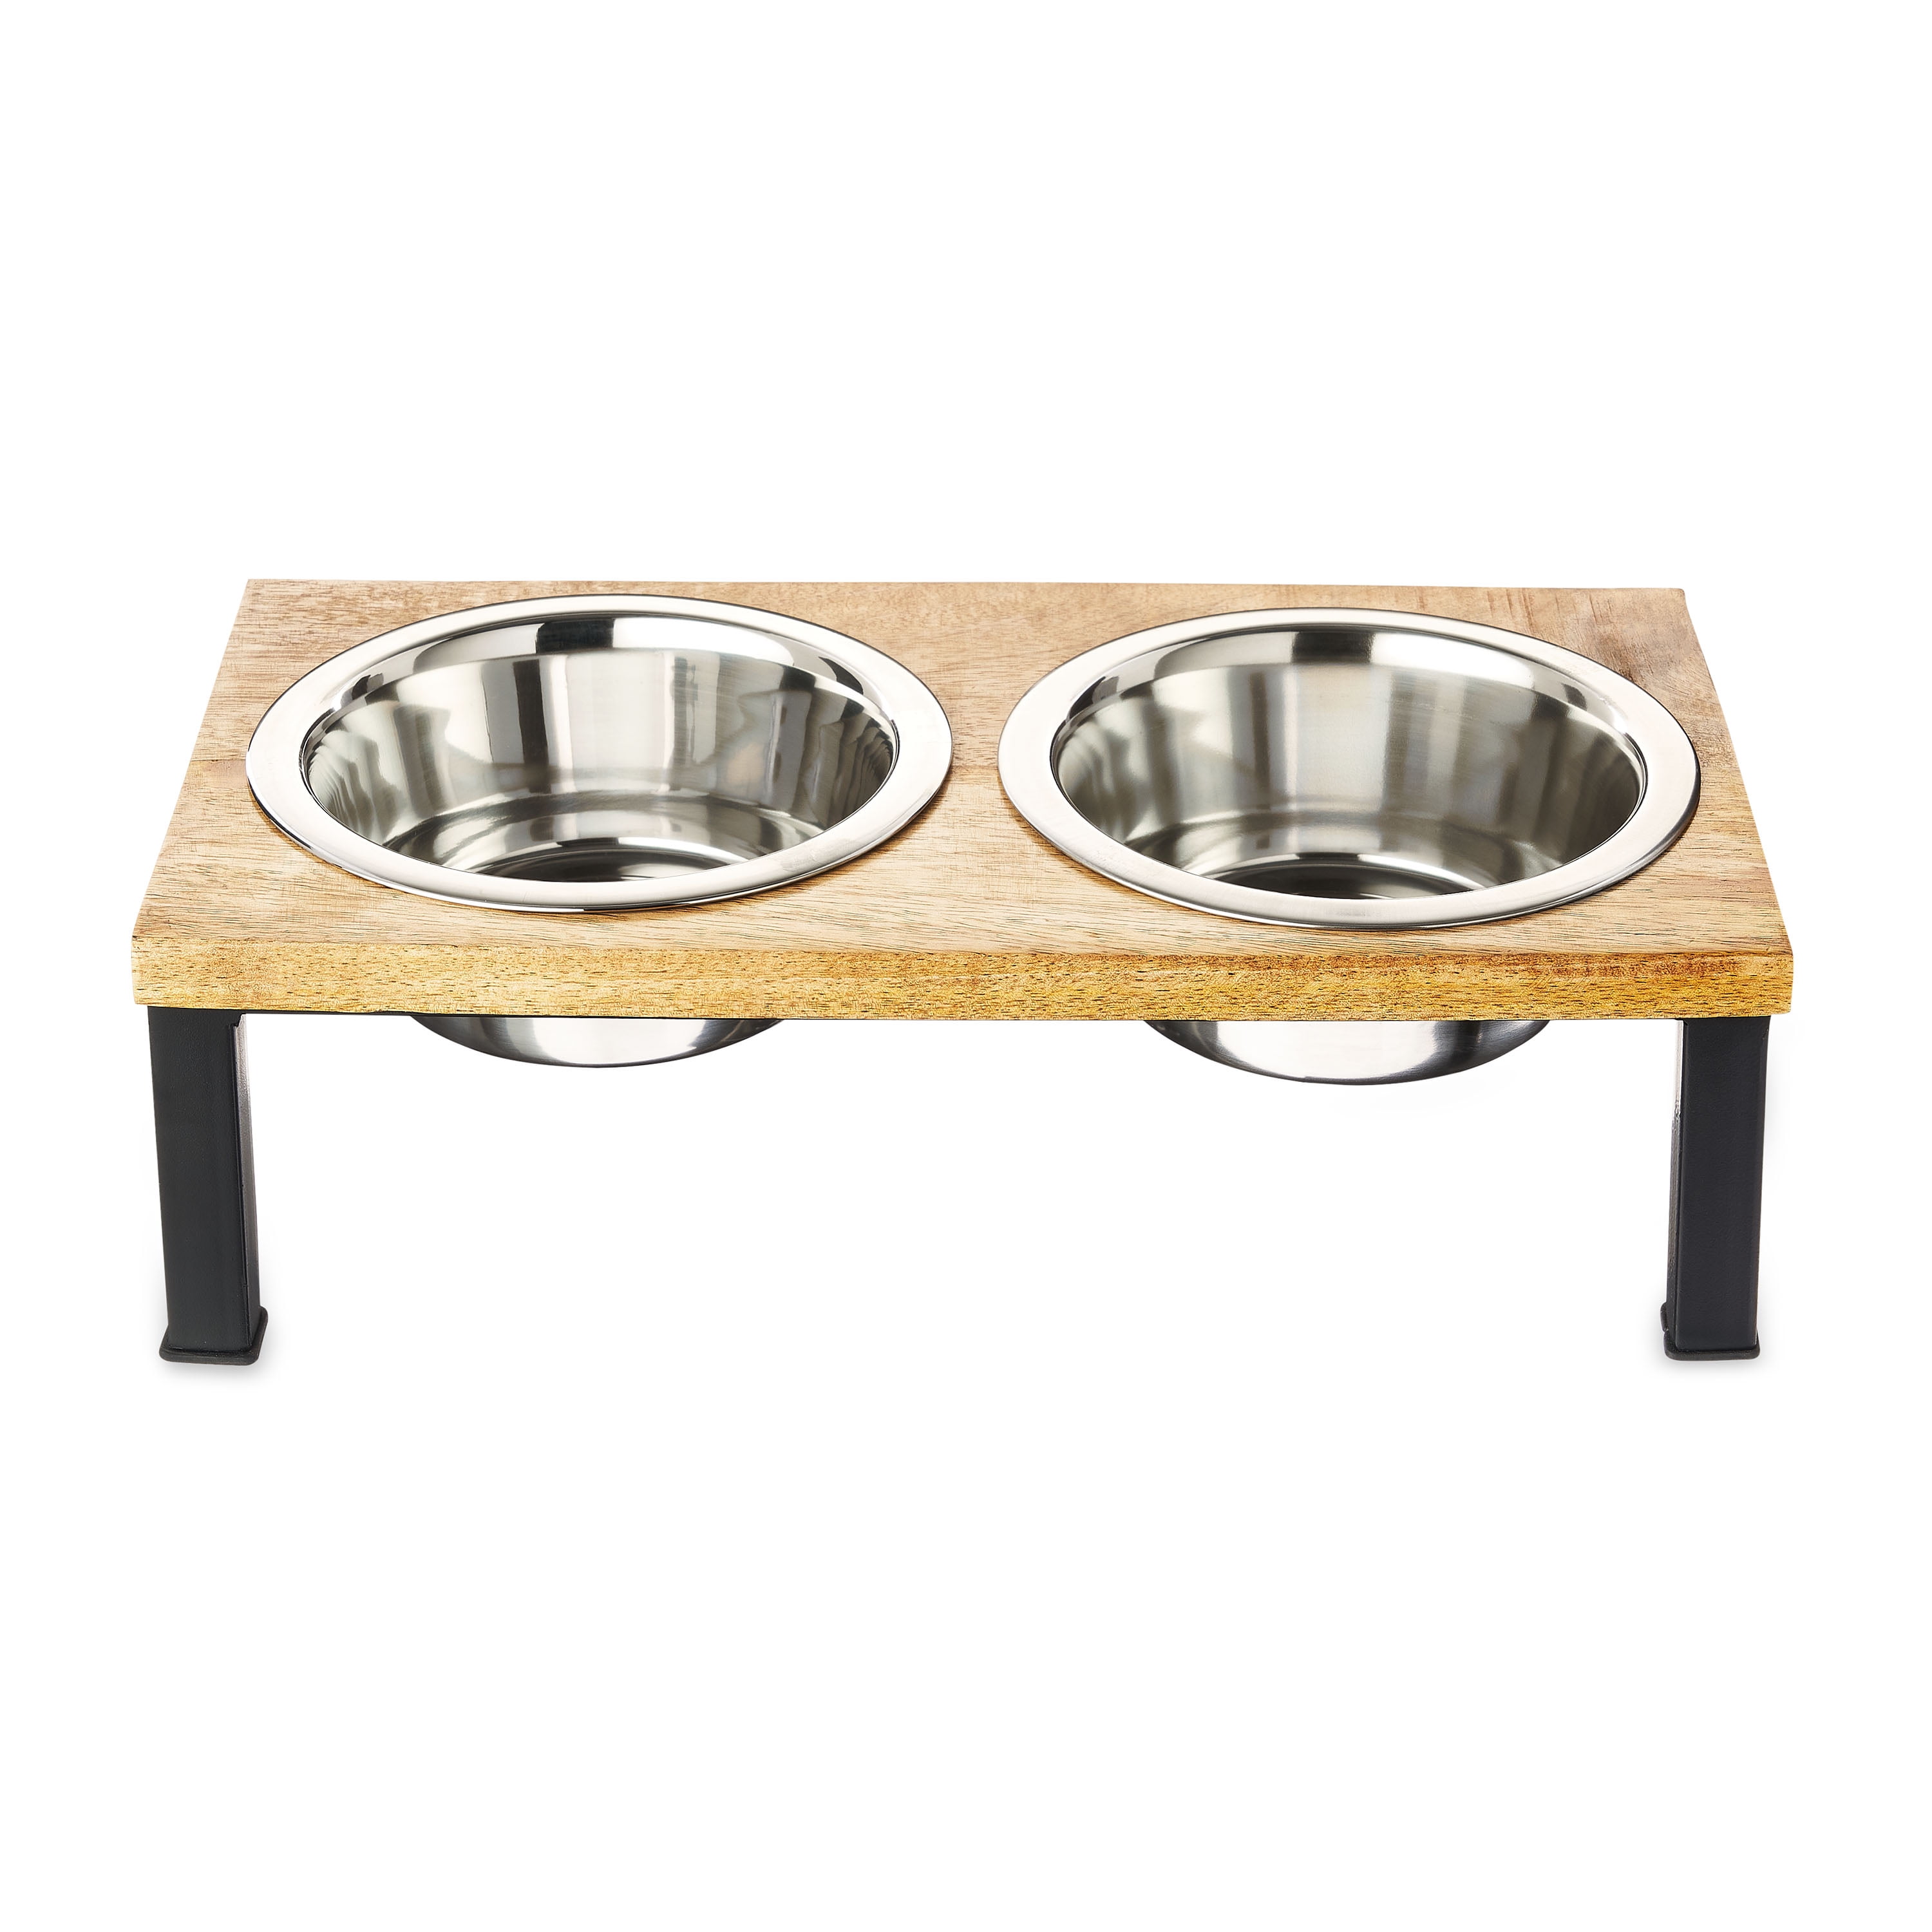 Elevated Pet Feeder with Stainless Steel Bowls - N/A - Pacific Blue